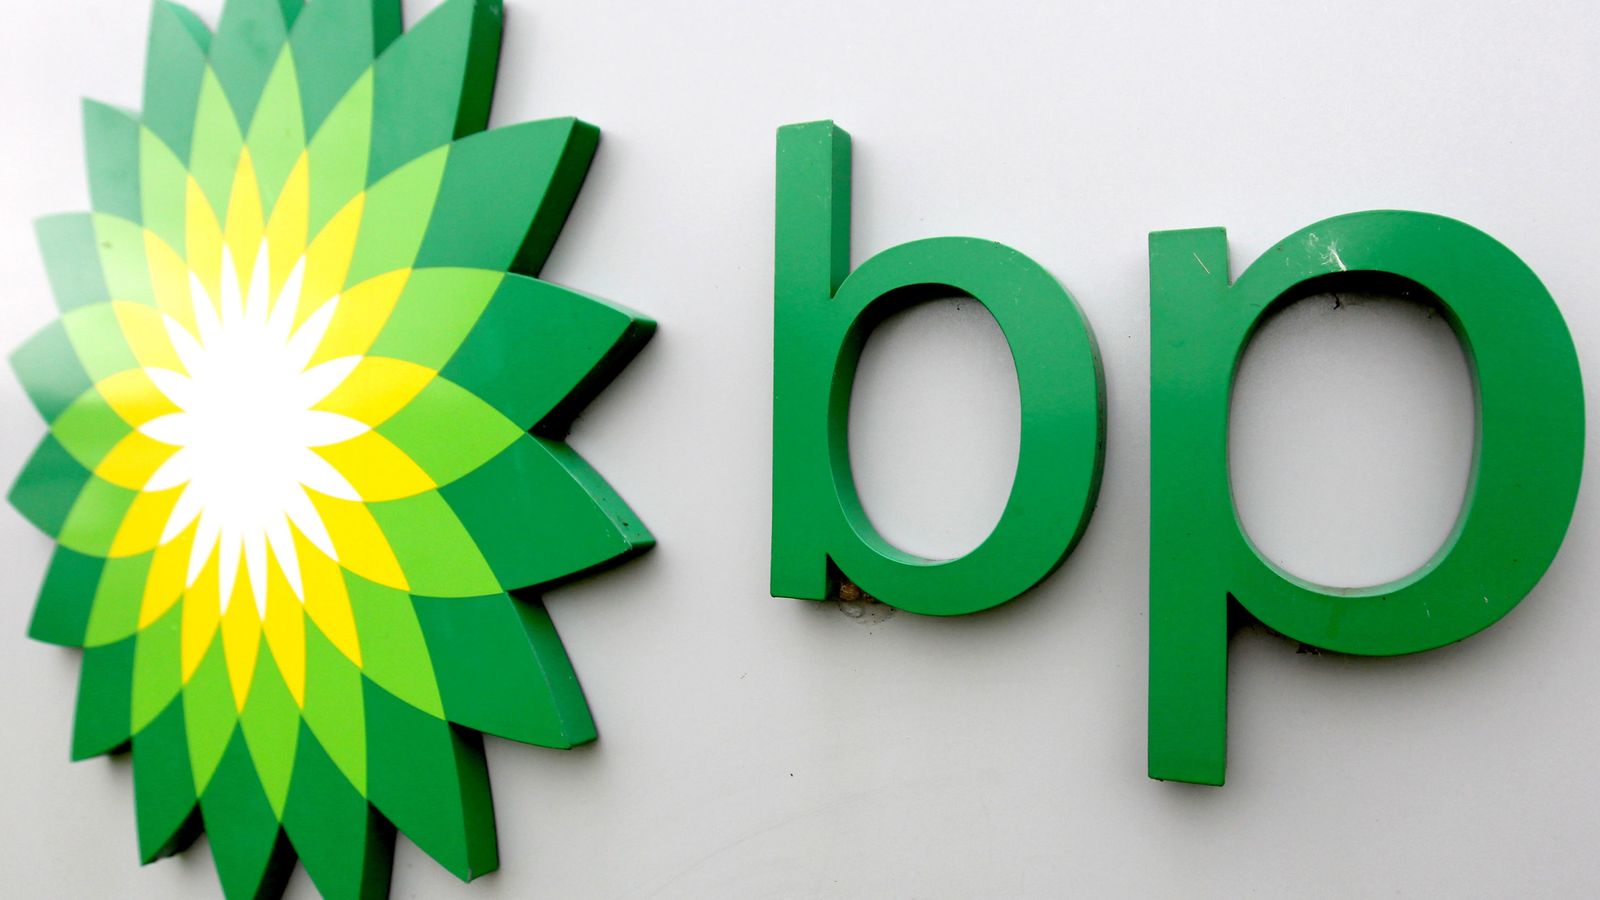 BP to 'accelerate greening' as surging energy prices push profits to $12.8bn